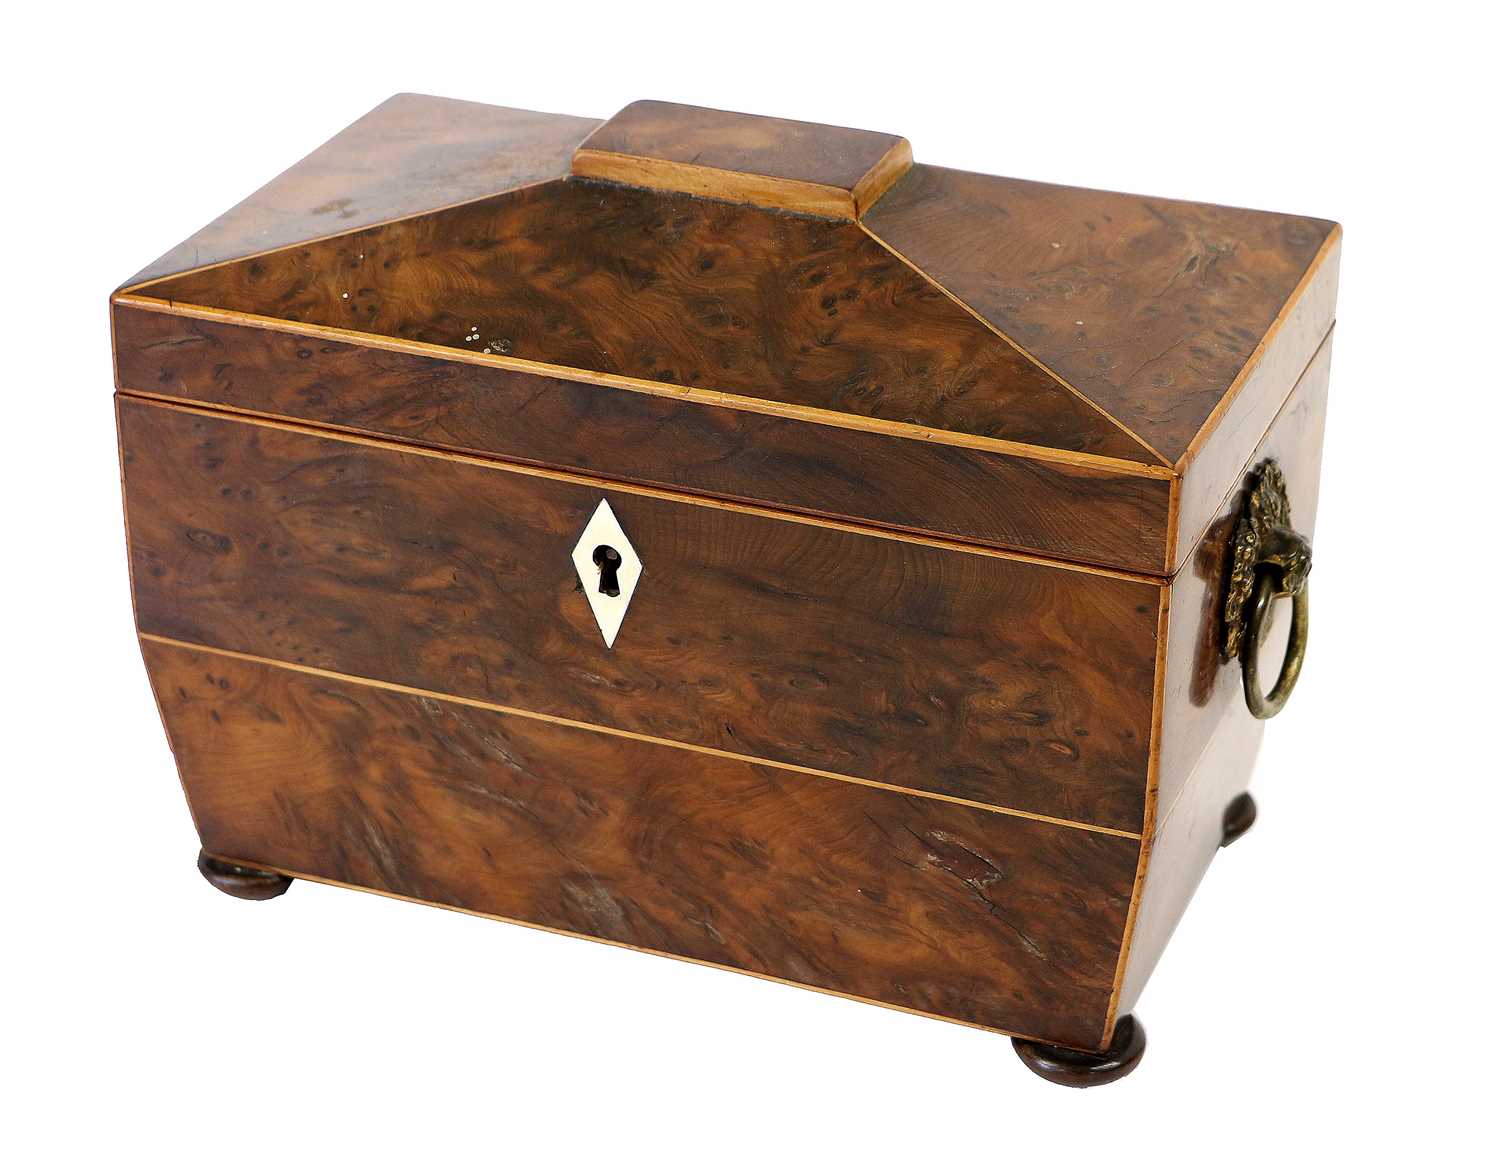 A Regency Burr Yewwood and Boxwood-Strung Tea Caddy, the hinged cover enclosing two lidded